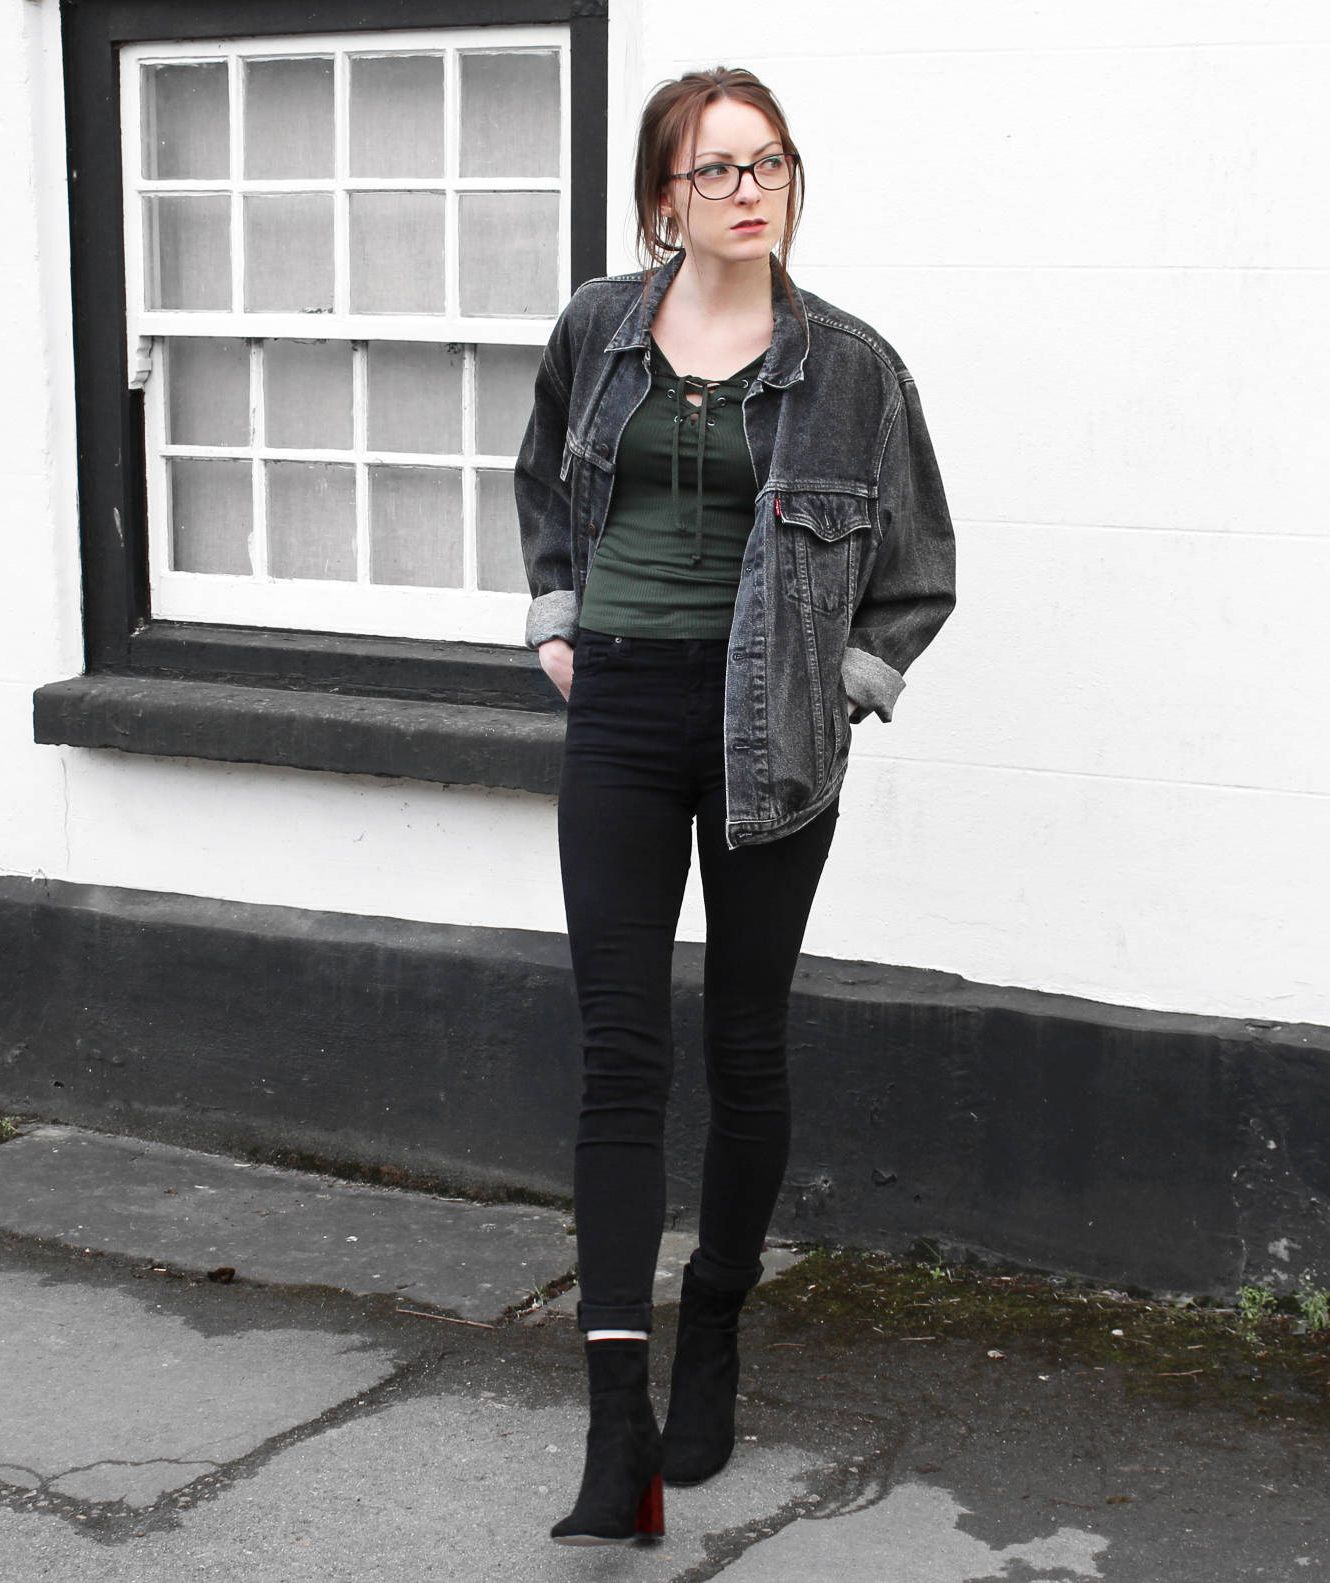 Frau mit Jeansjacke in Vintage-Waschung mit dunklem Outfit